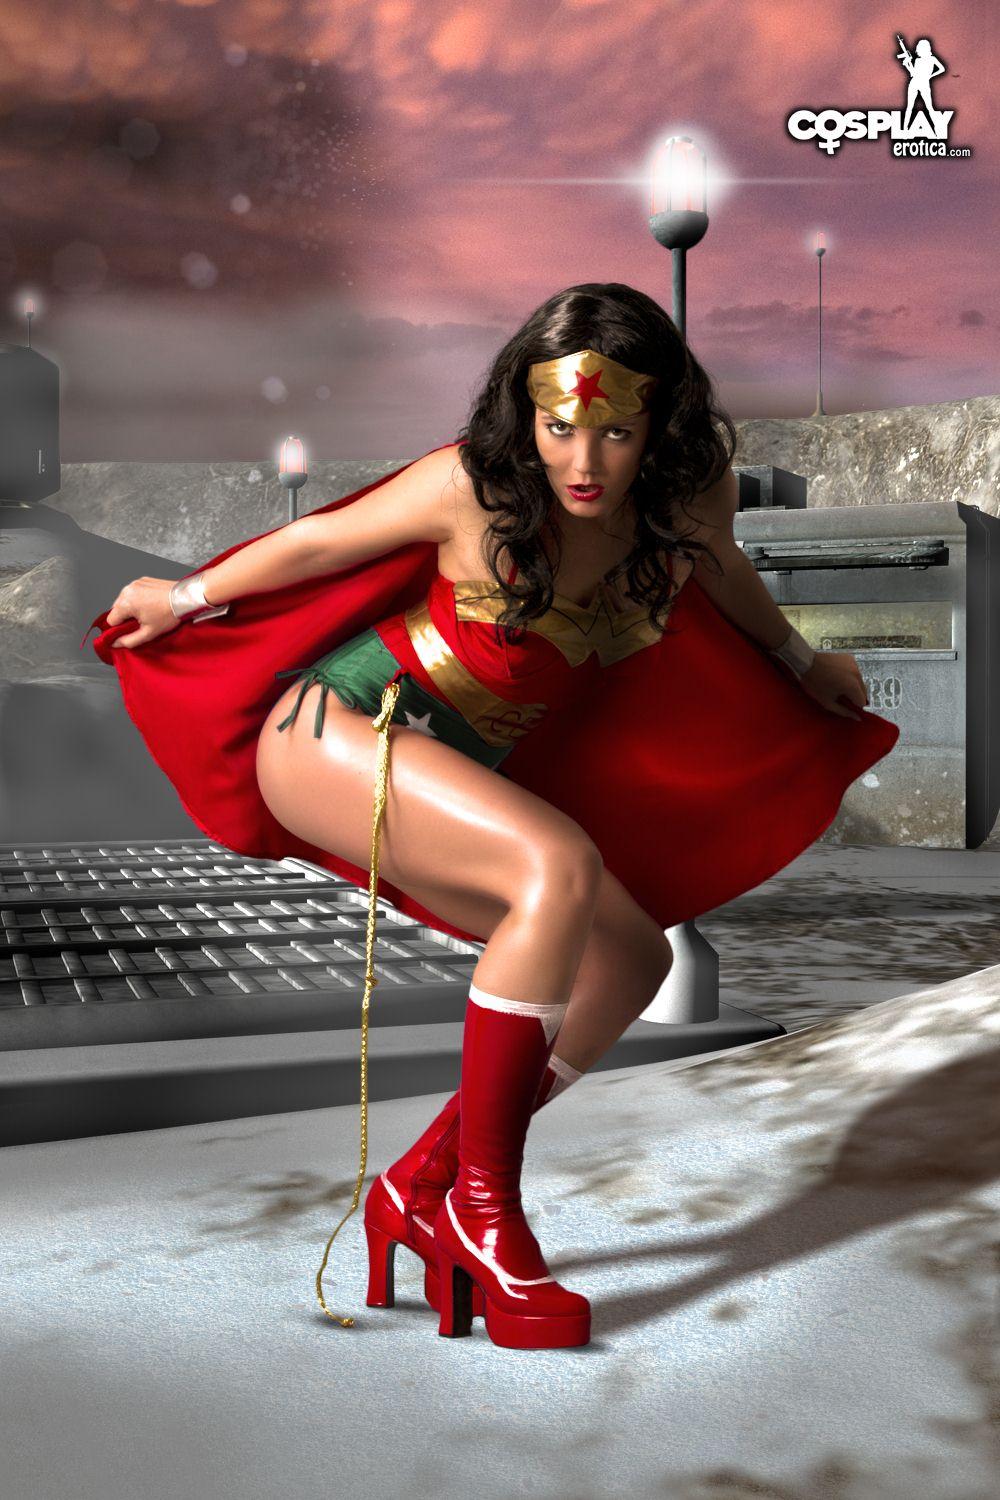 Pictures of stunning cosplayer Gogo dressed up as Wonder Woman #54559930